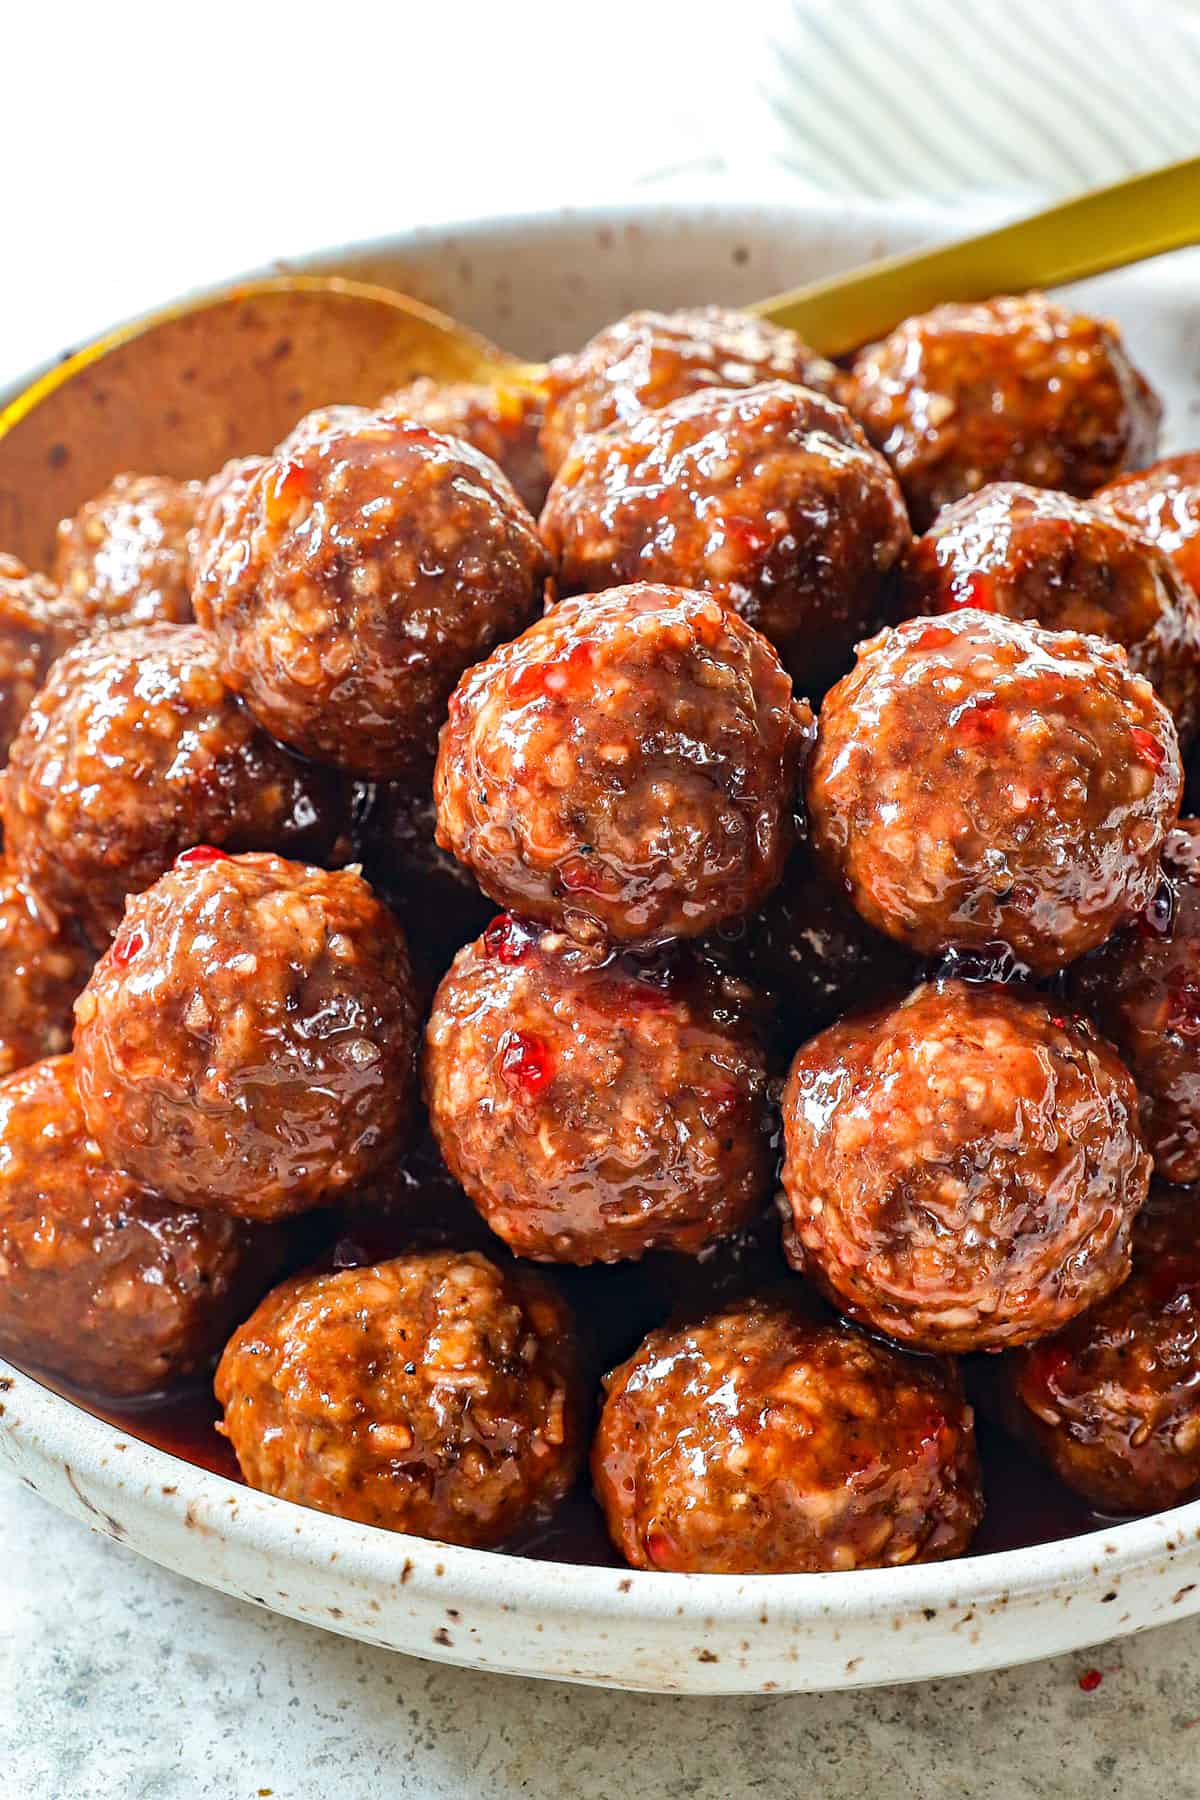 meatballs with grape jelly in a serving bowl showing how juicy they are